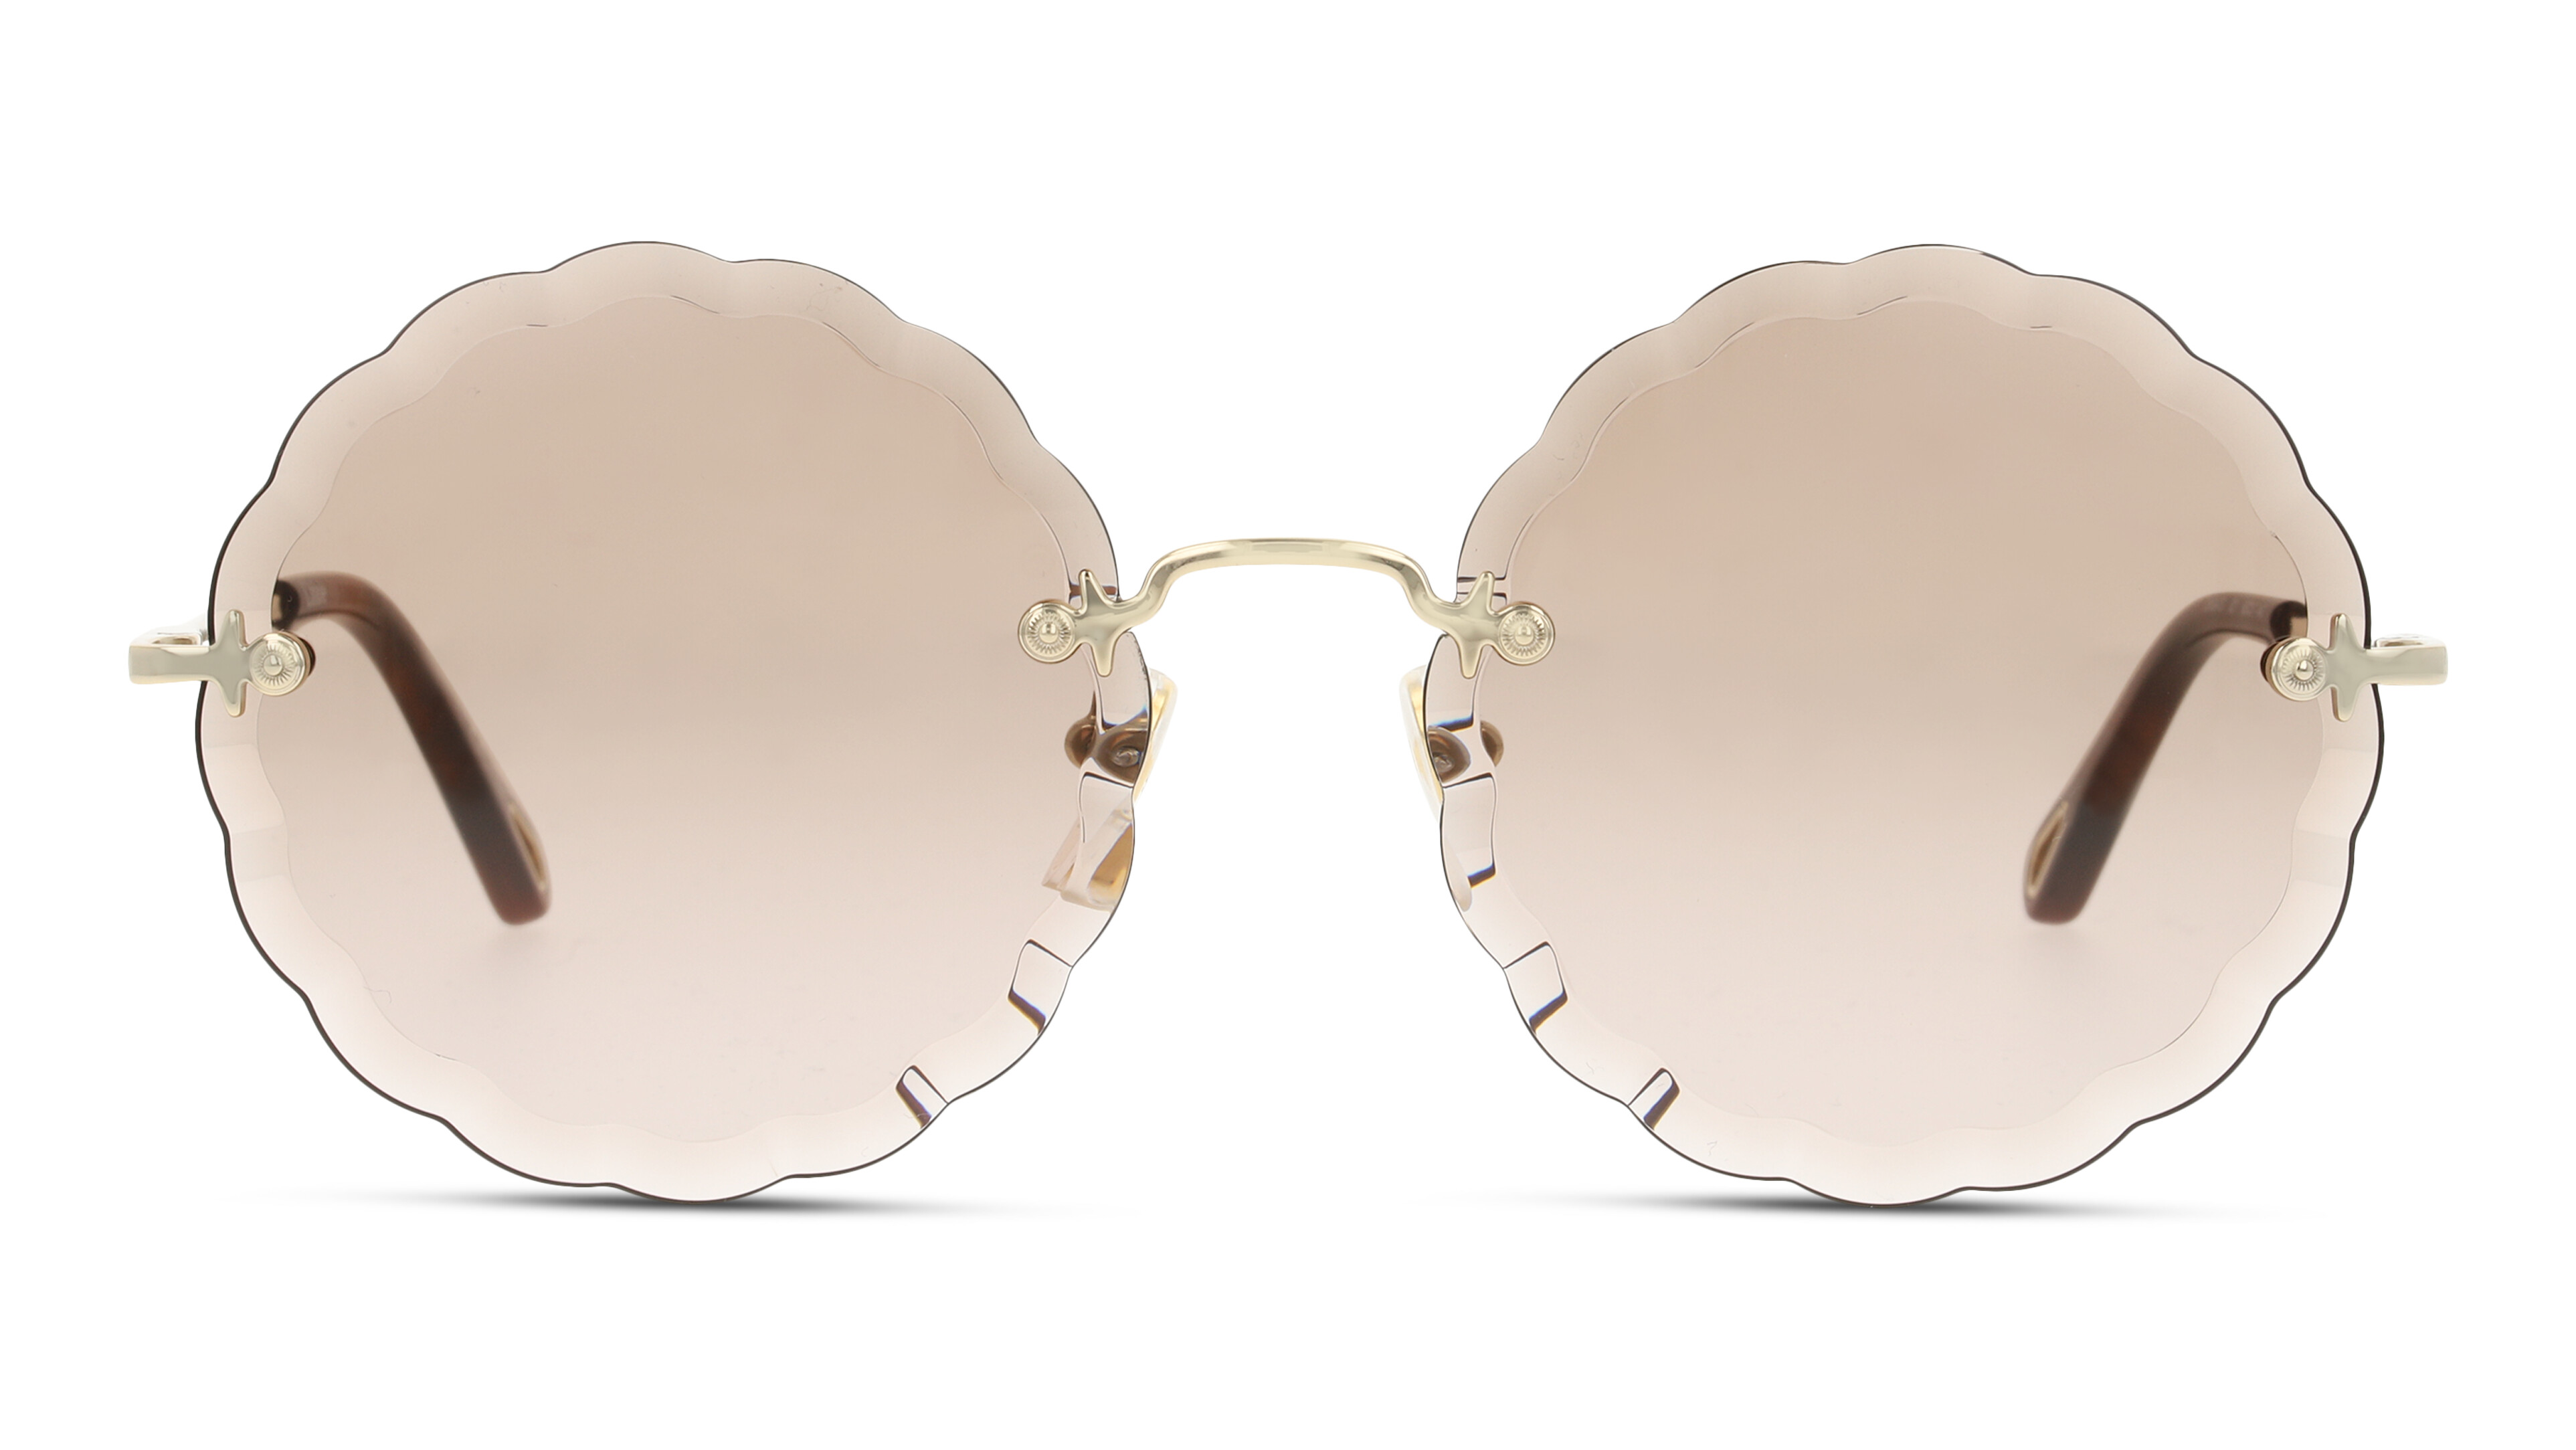 [products.image.front] Chloe CH0047S 001 Sonnenbrille